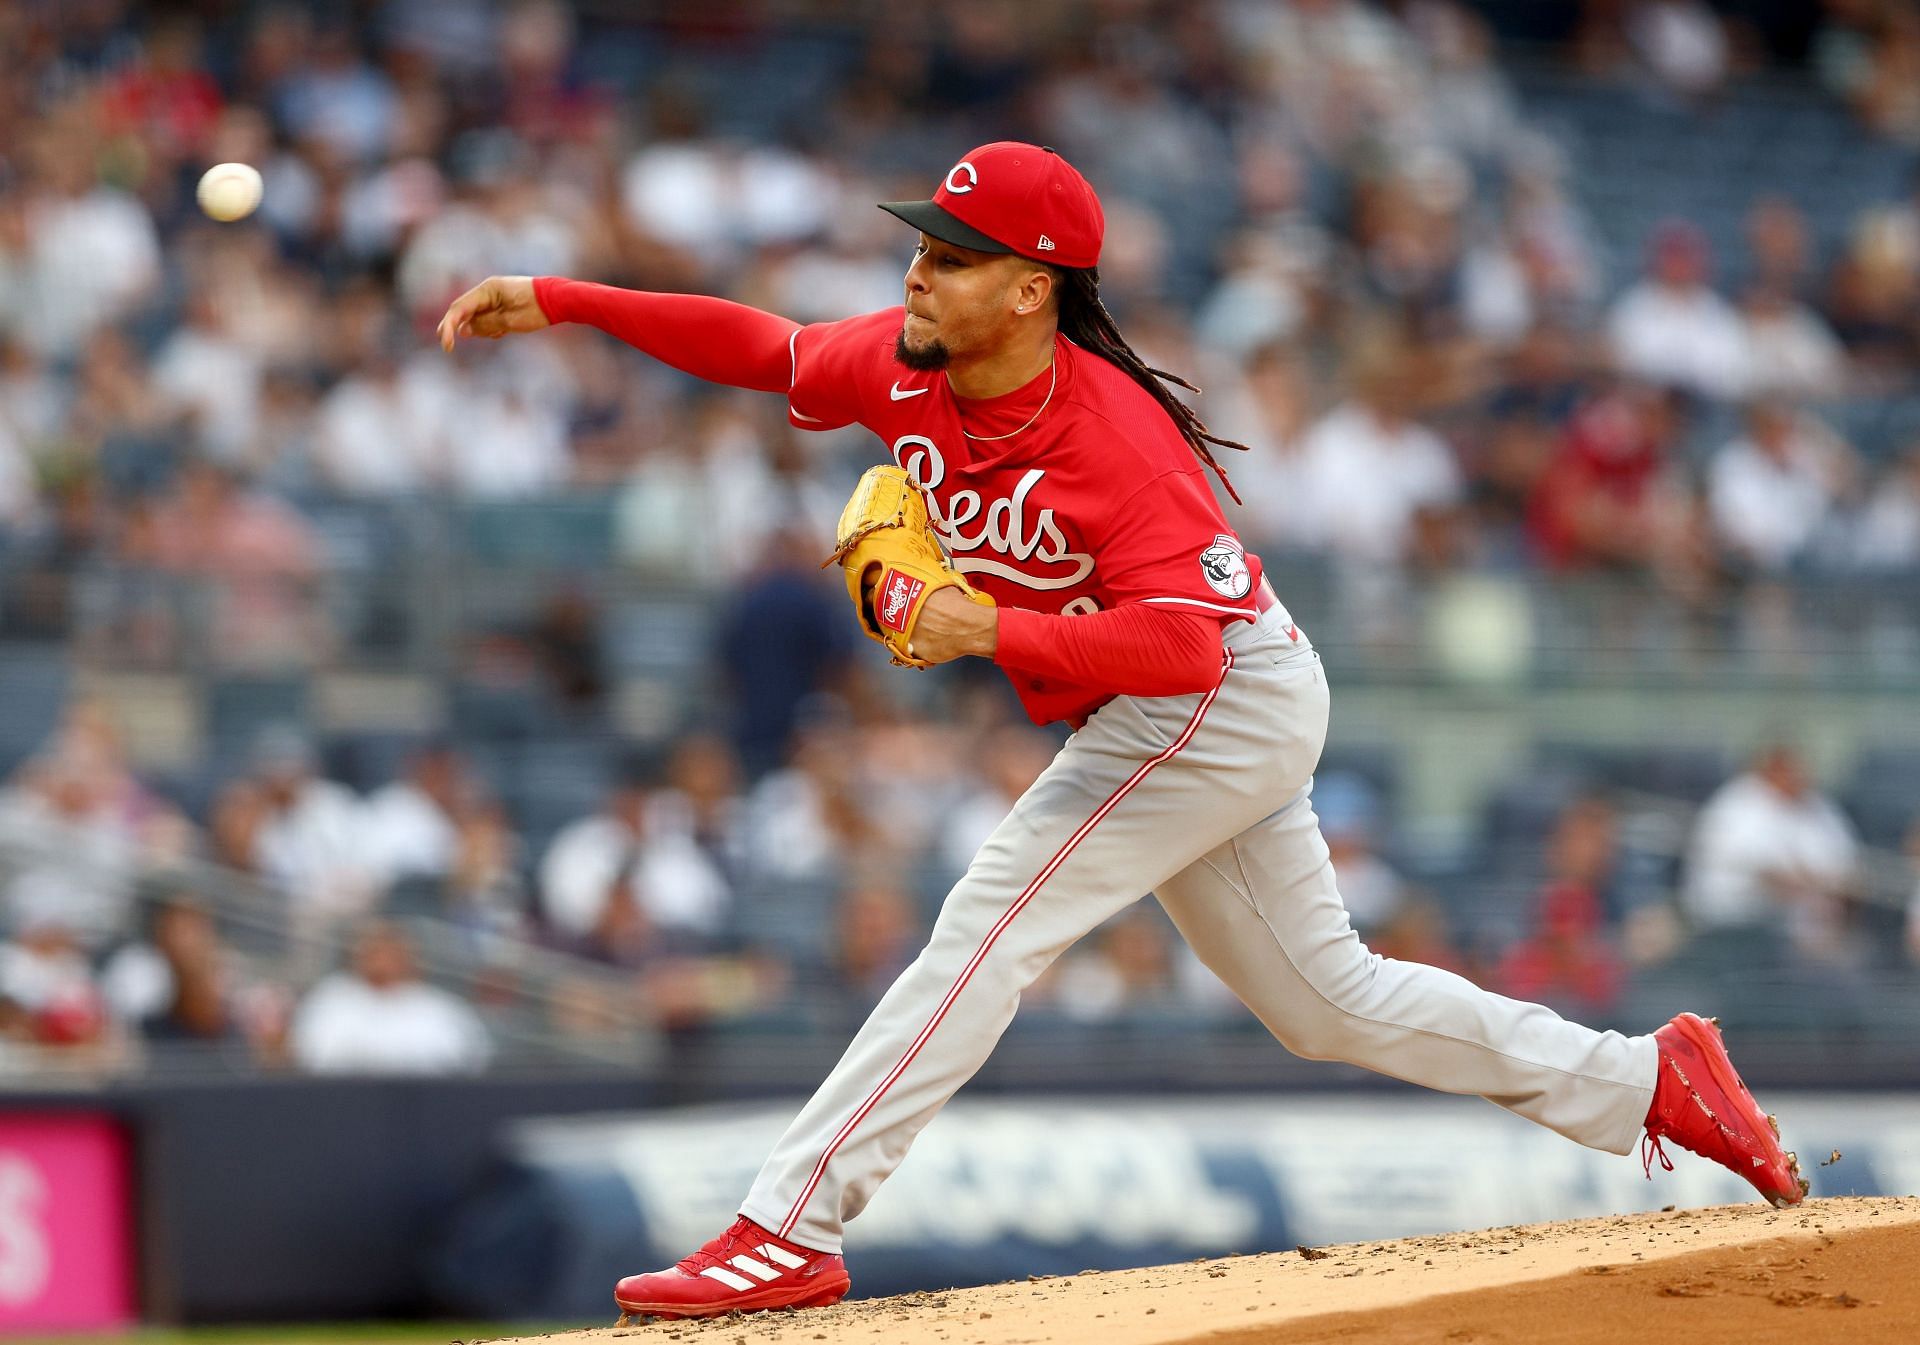 Luis Castillo throws the ball during the game between the Cincinnati Reds and the New York Yankees.